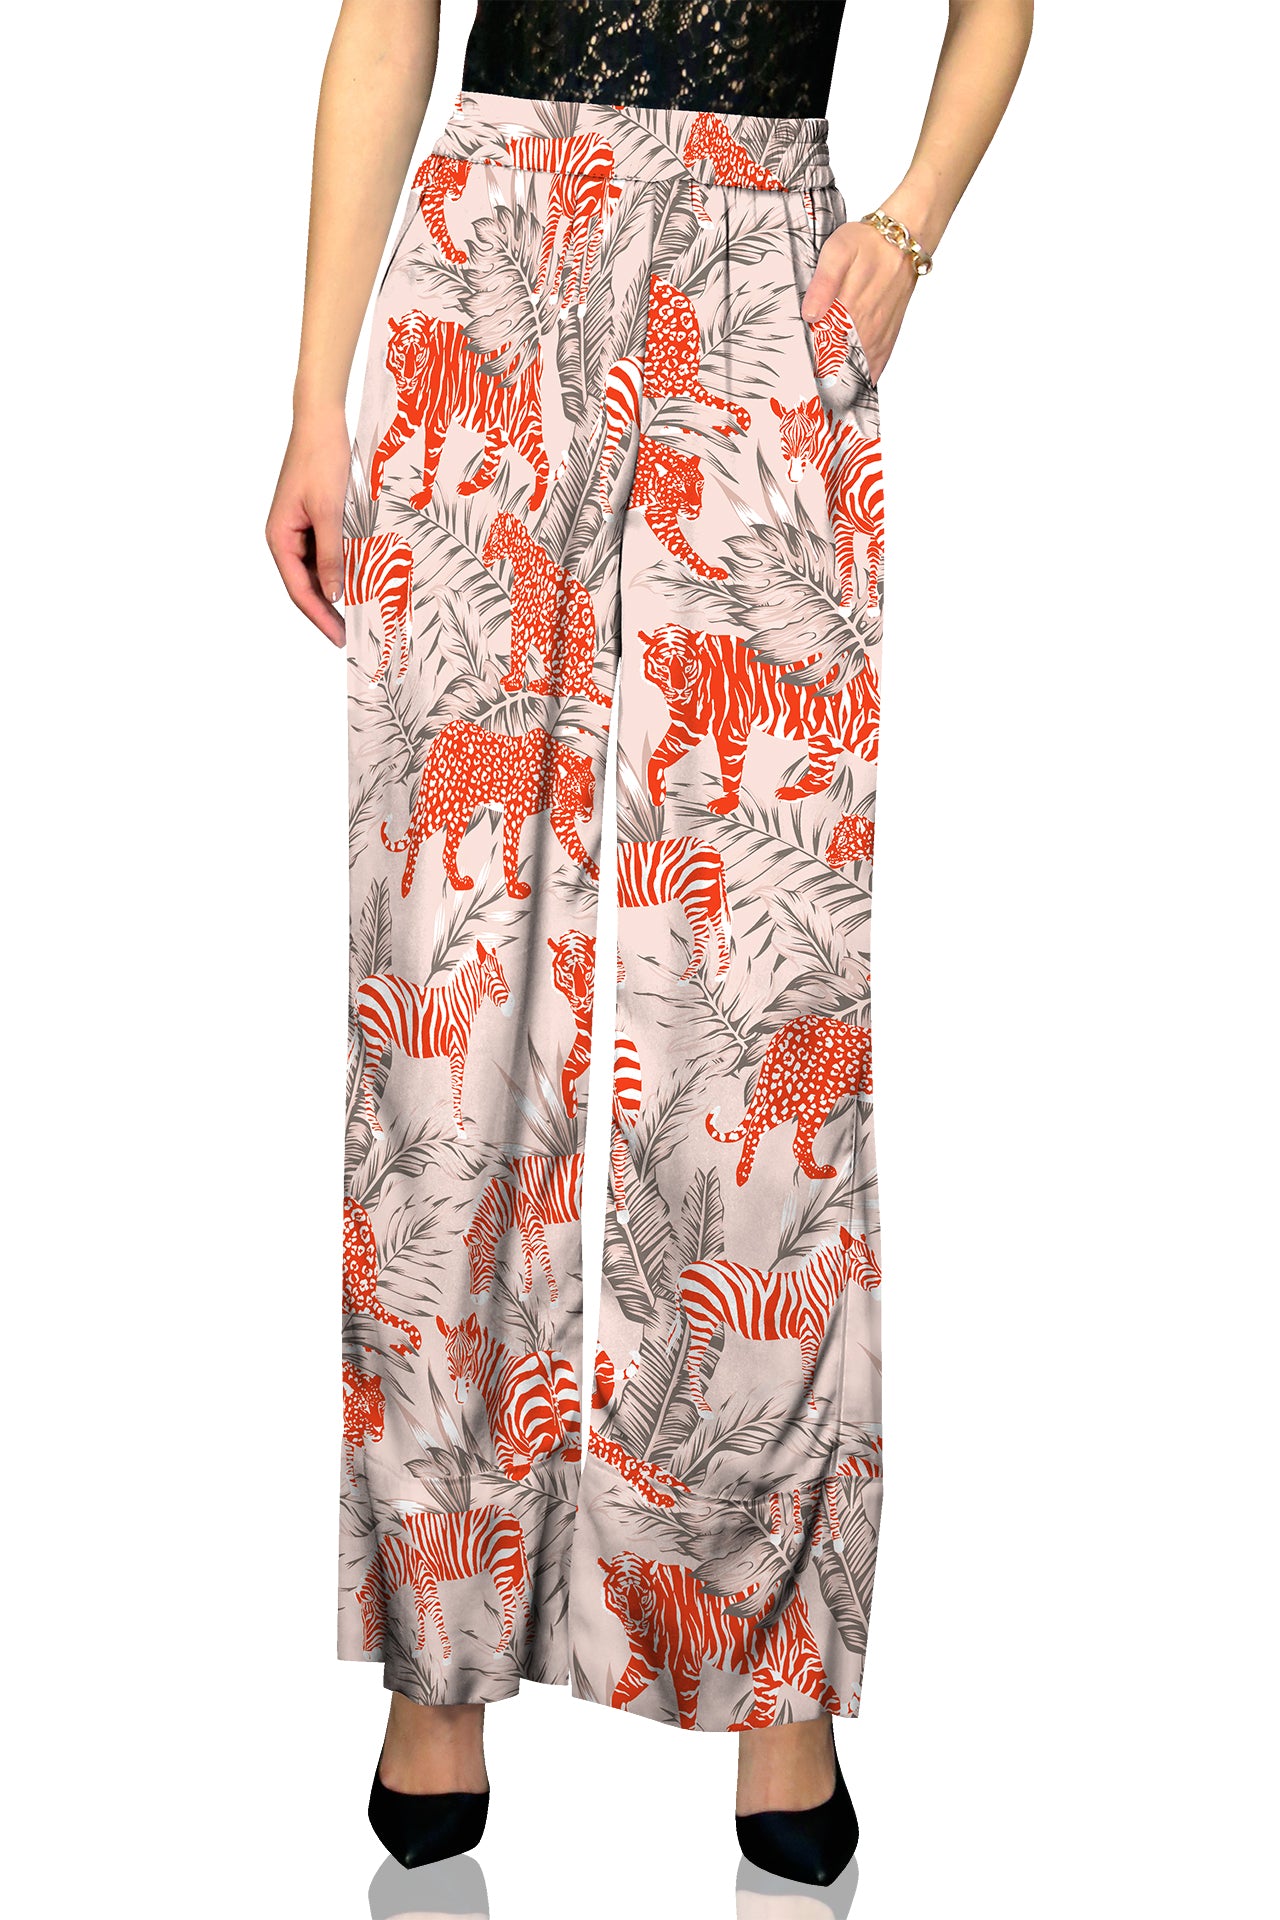 As seen on Kyle Zebra and Tiger Silk Pants in Orange